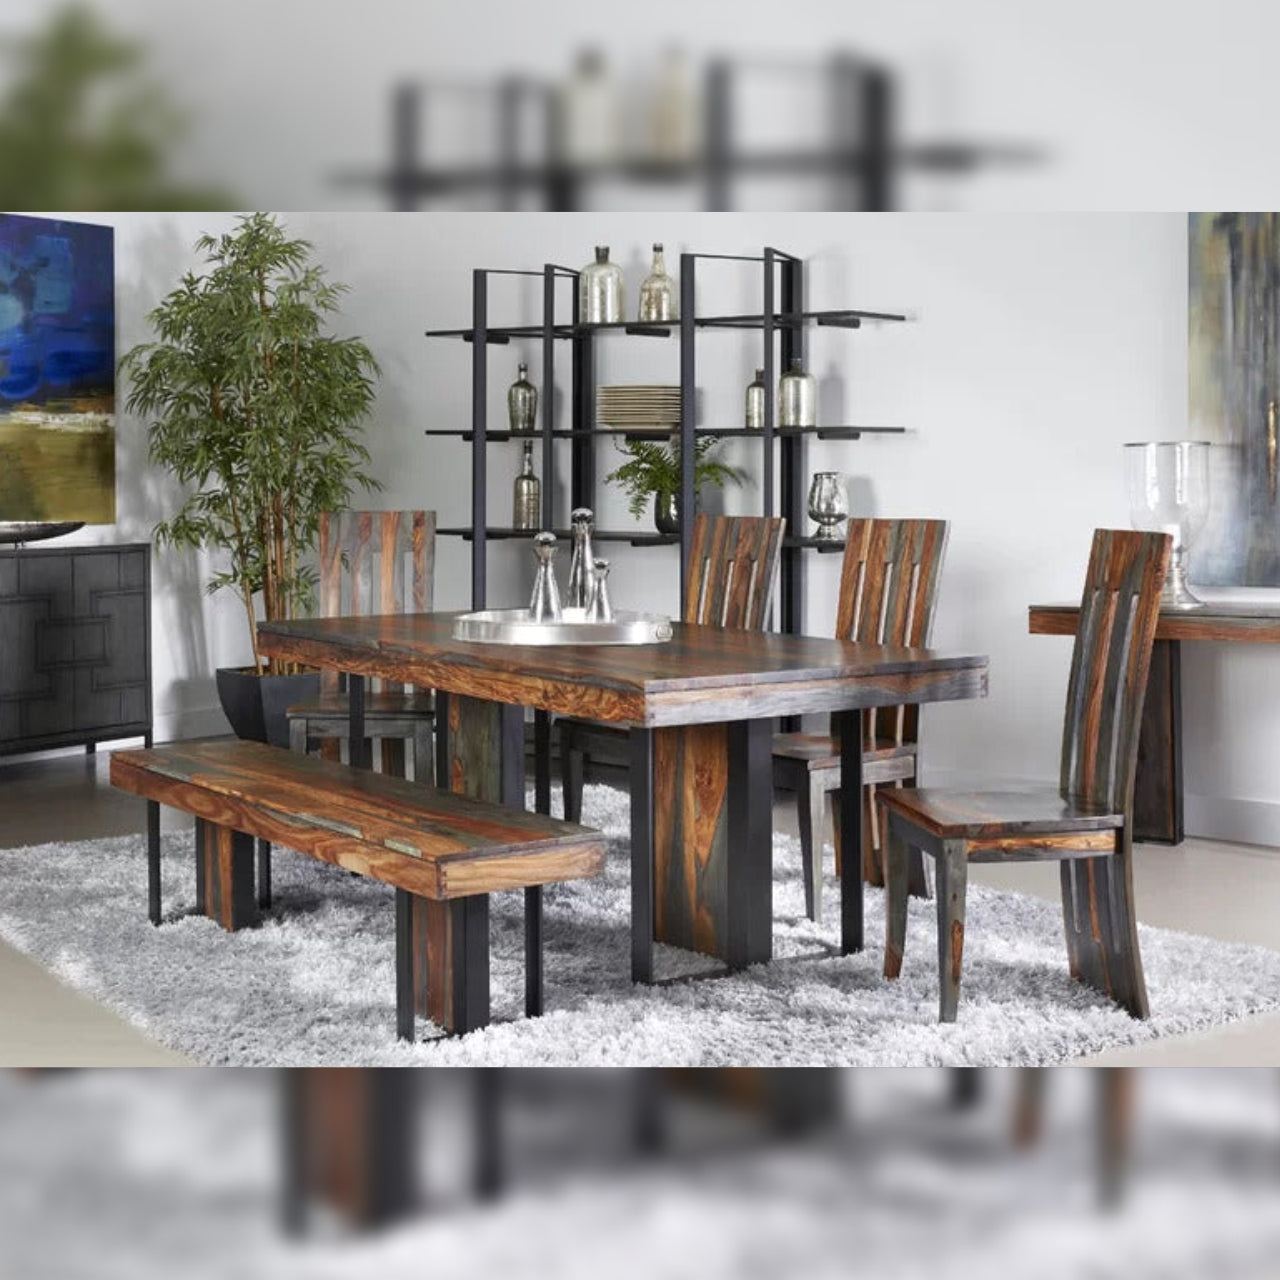 Sheesham Furniture Dining Table with 6 Chairs Dining Set